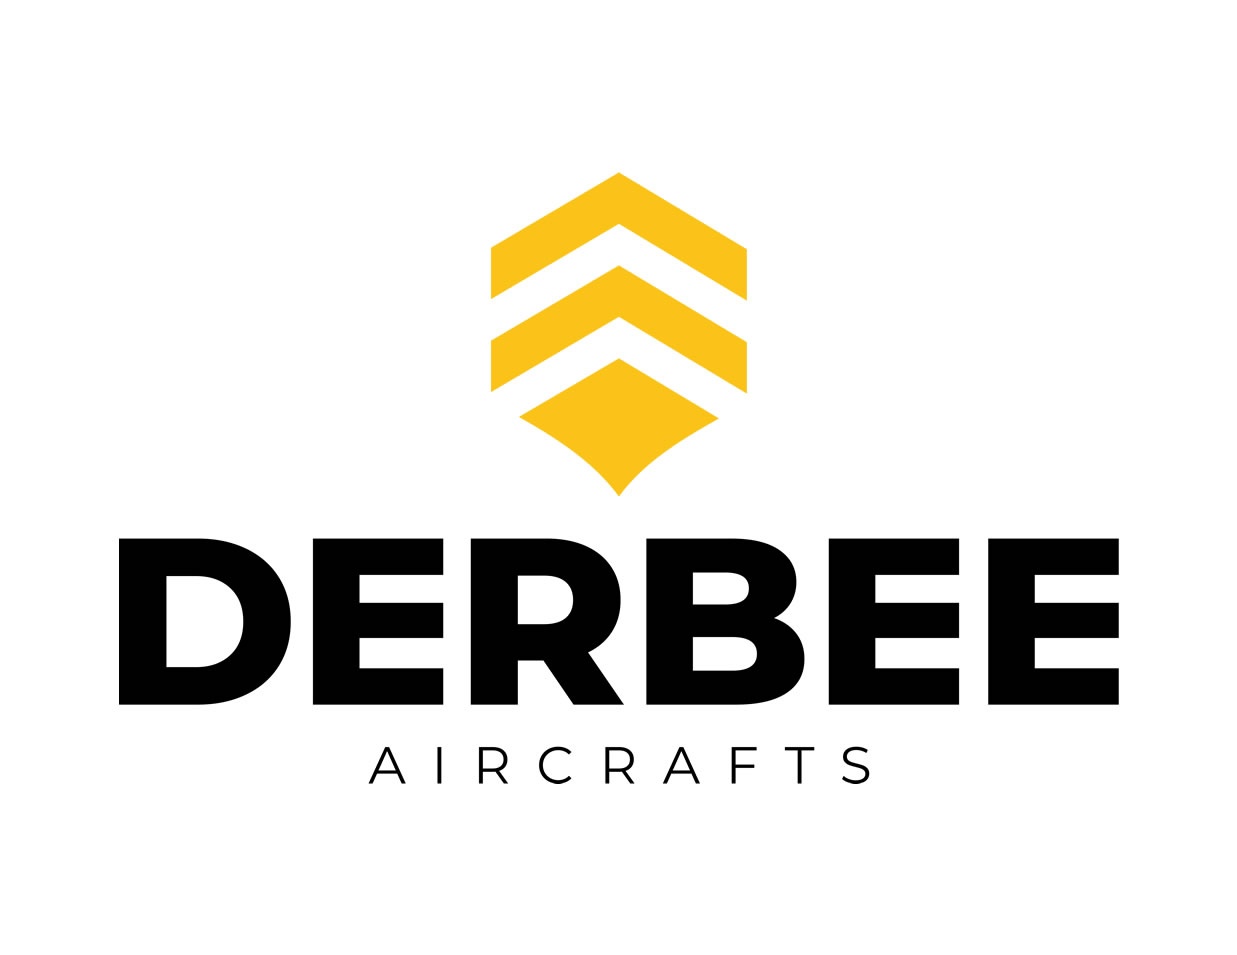 Derbee Aircrafts by D-Power